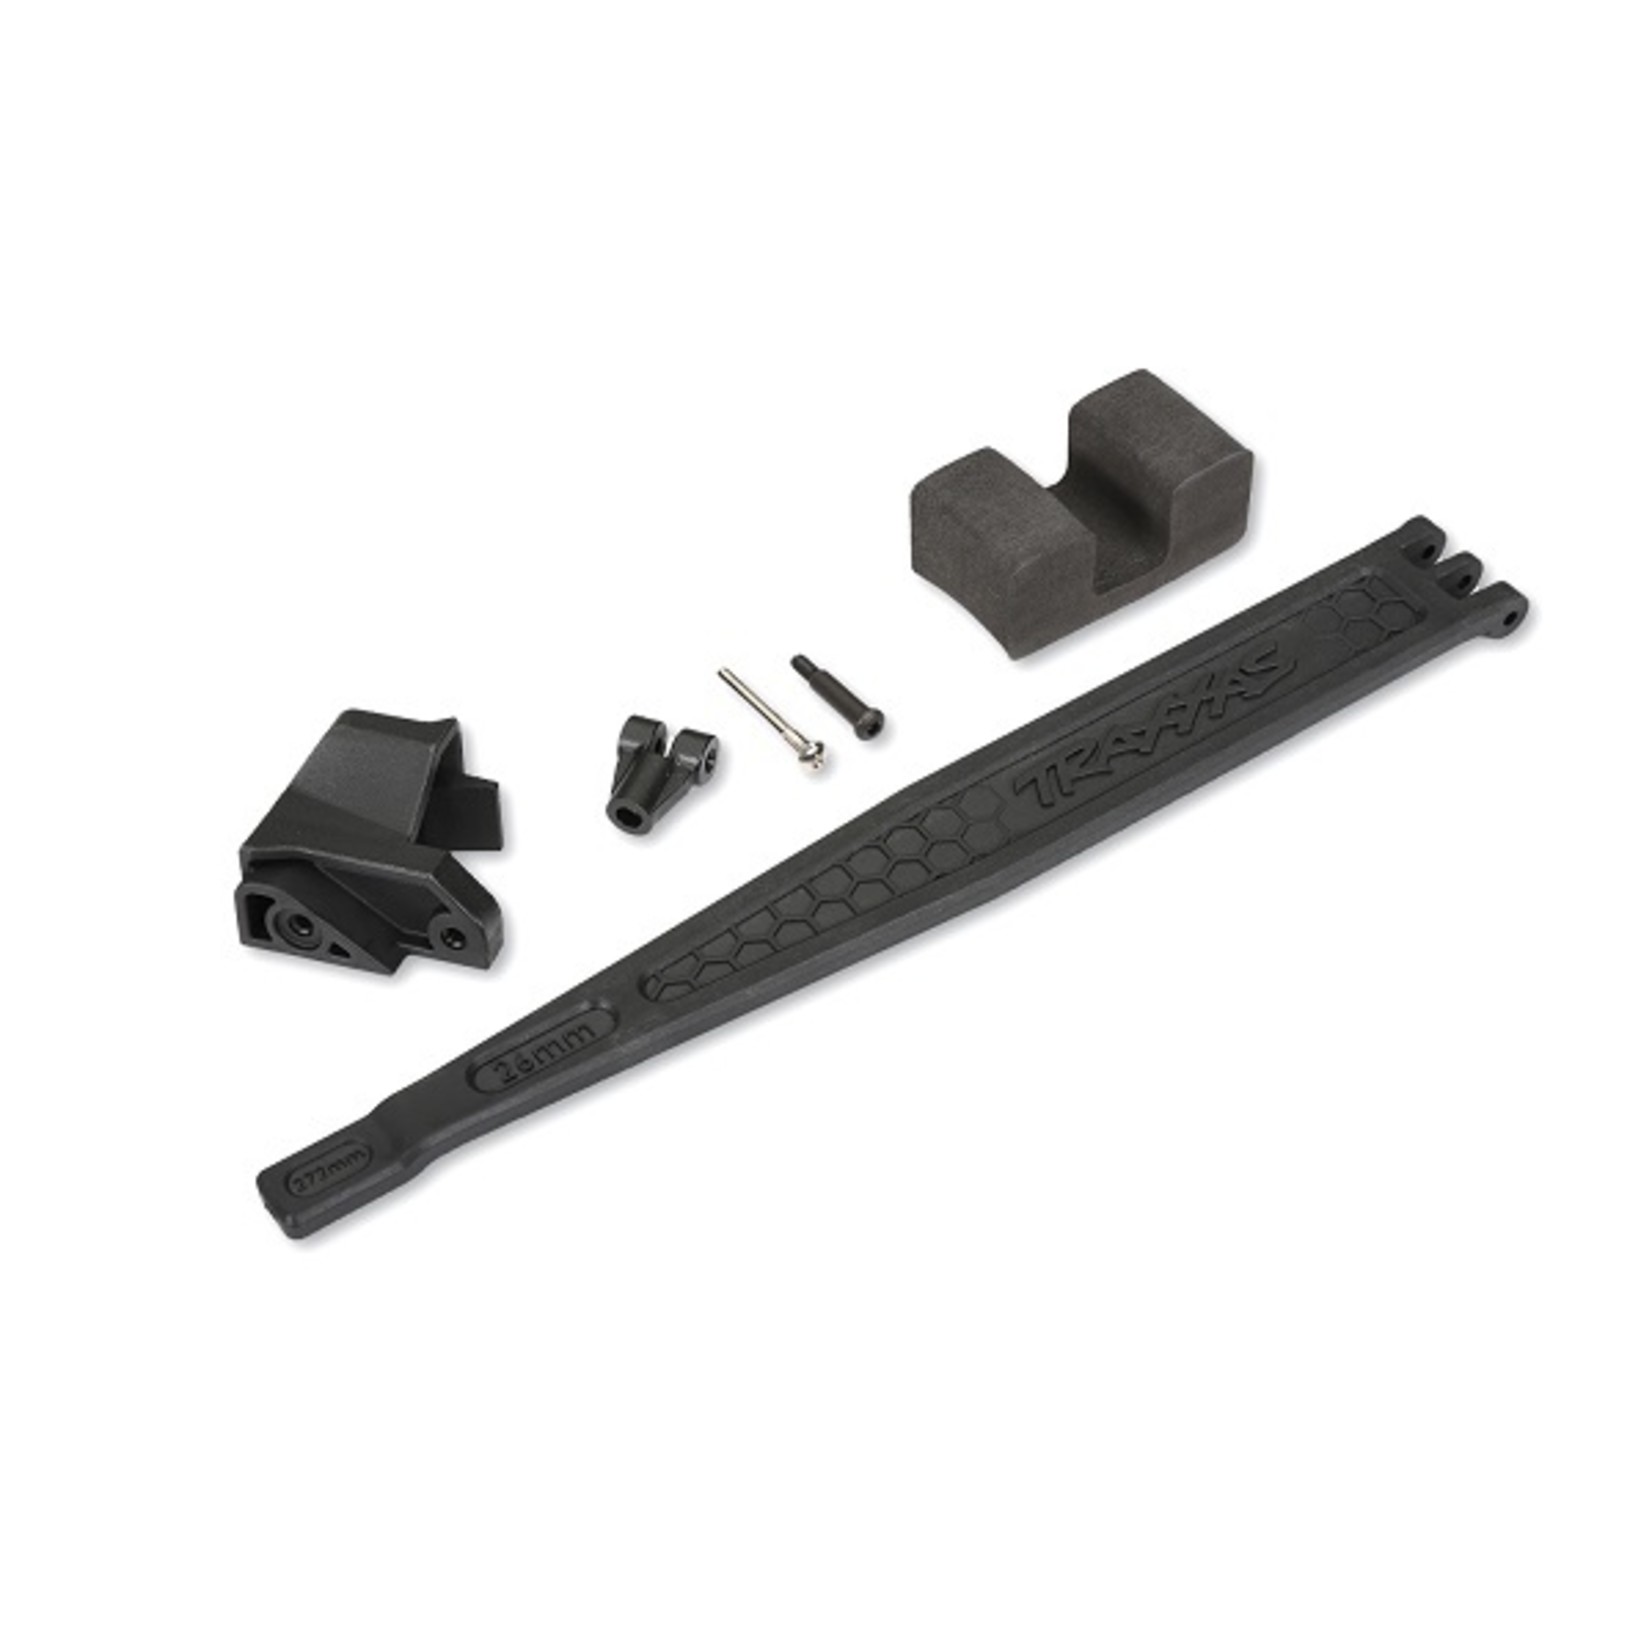 Traxxas 9346 - Battery hold-down/ battery clip/ hold-down post/